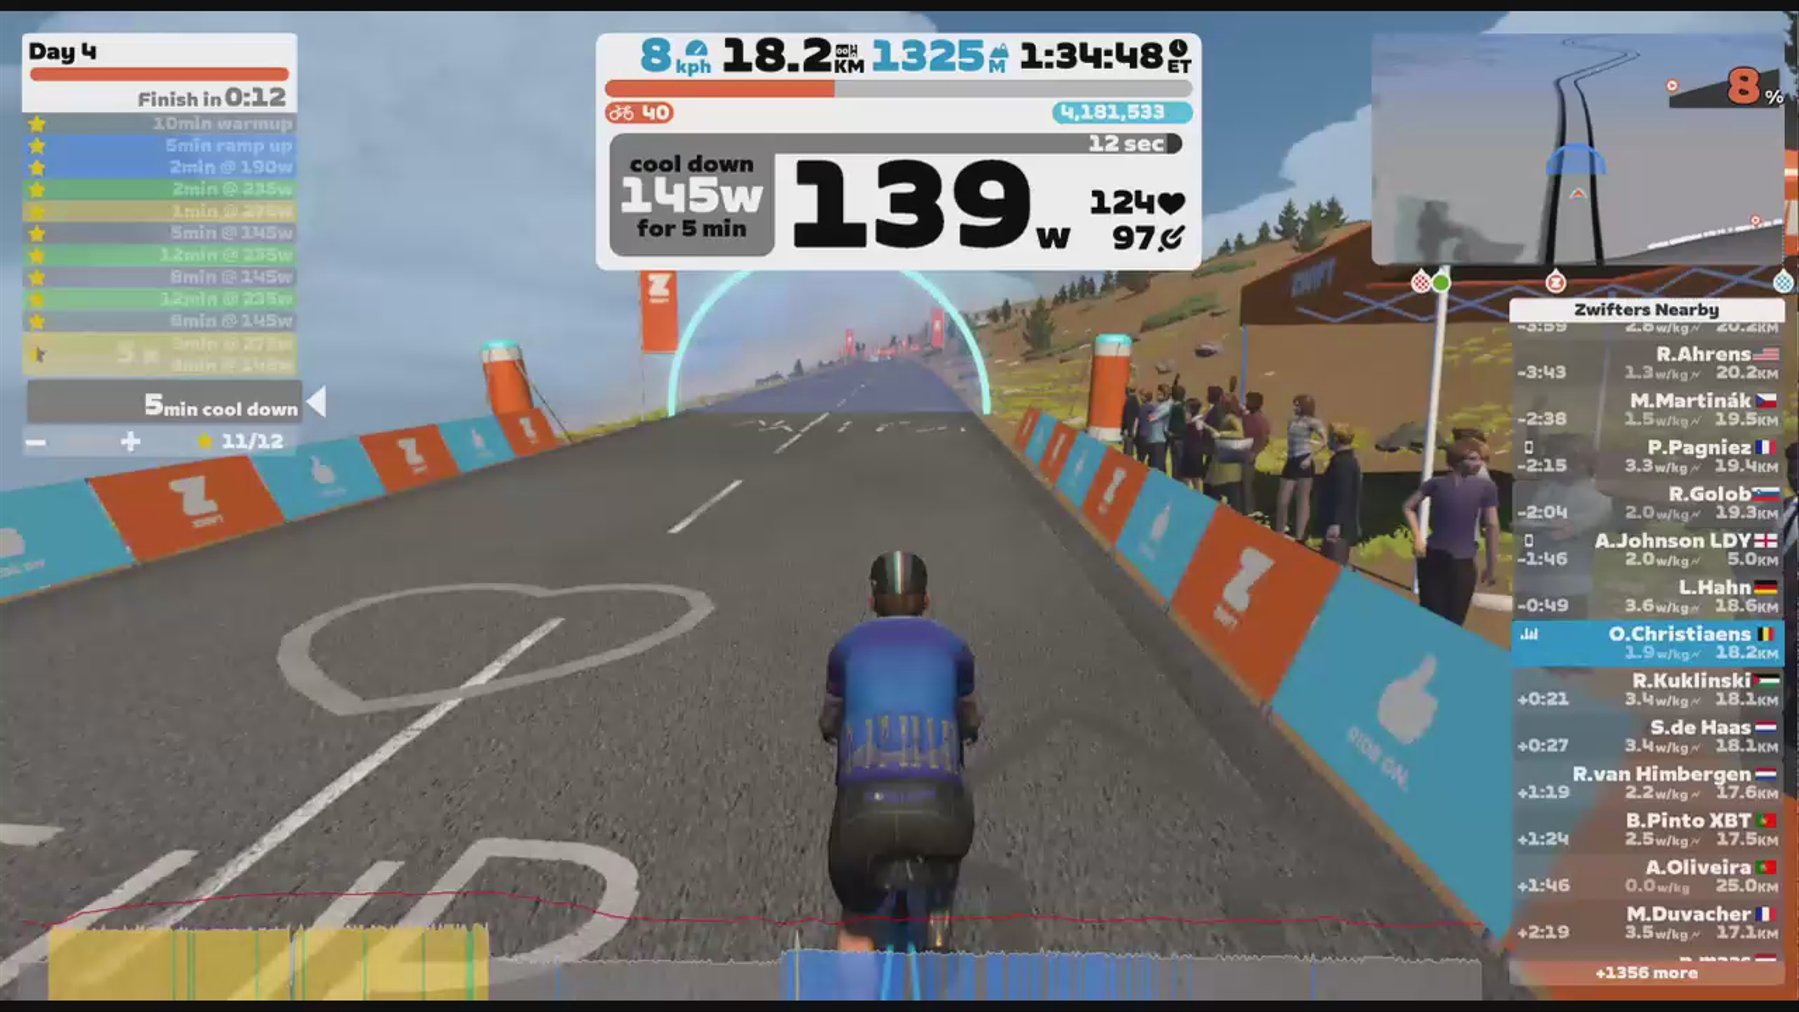 Zwift - Day 4 in France